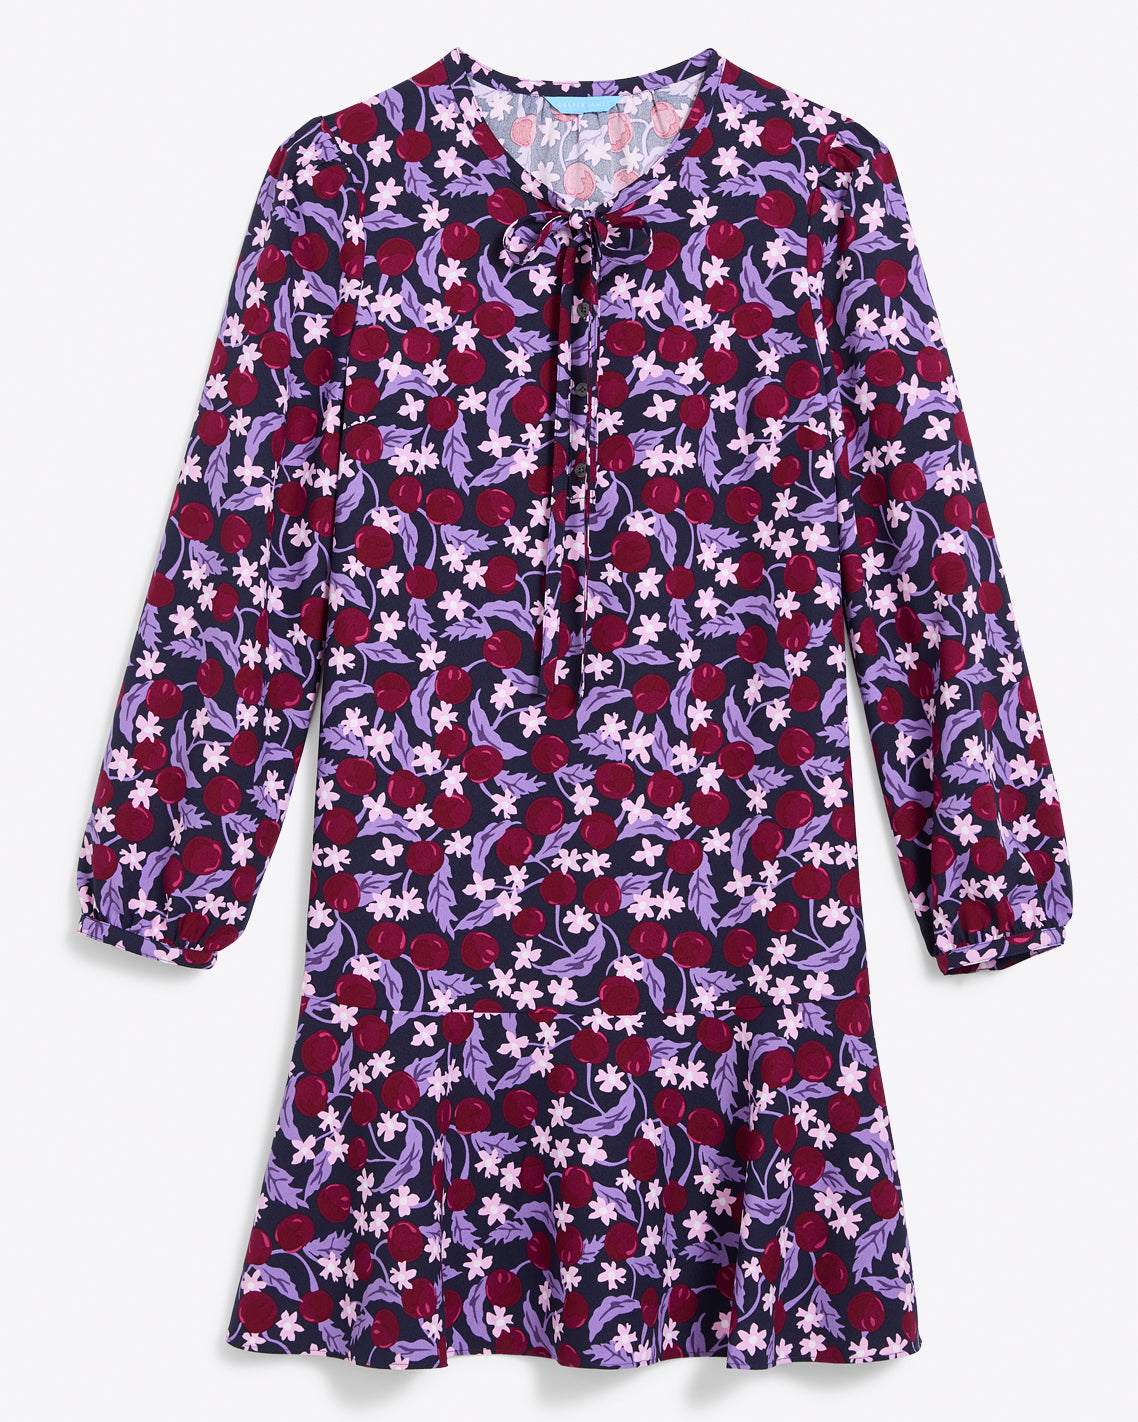 Kate Spade Floral Dress - Finding Beautiful Truth